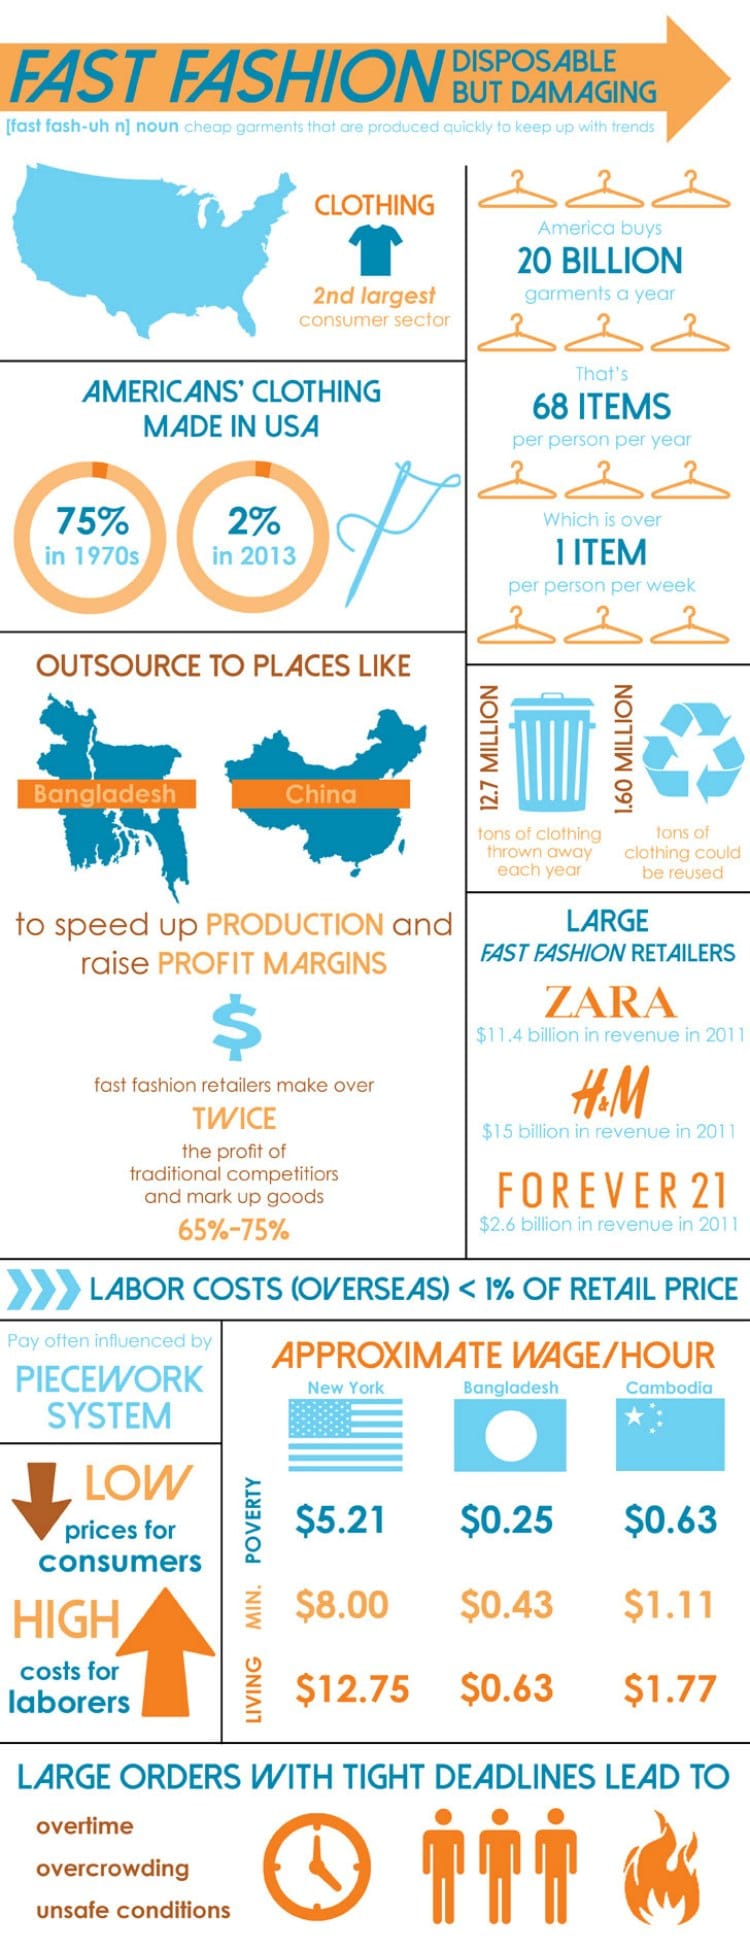 fast fashion industry infographic